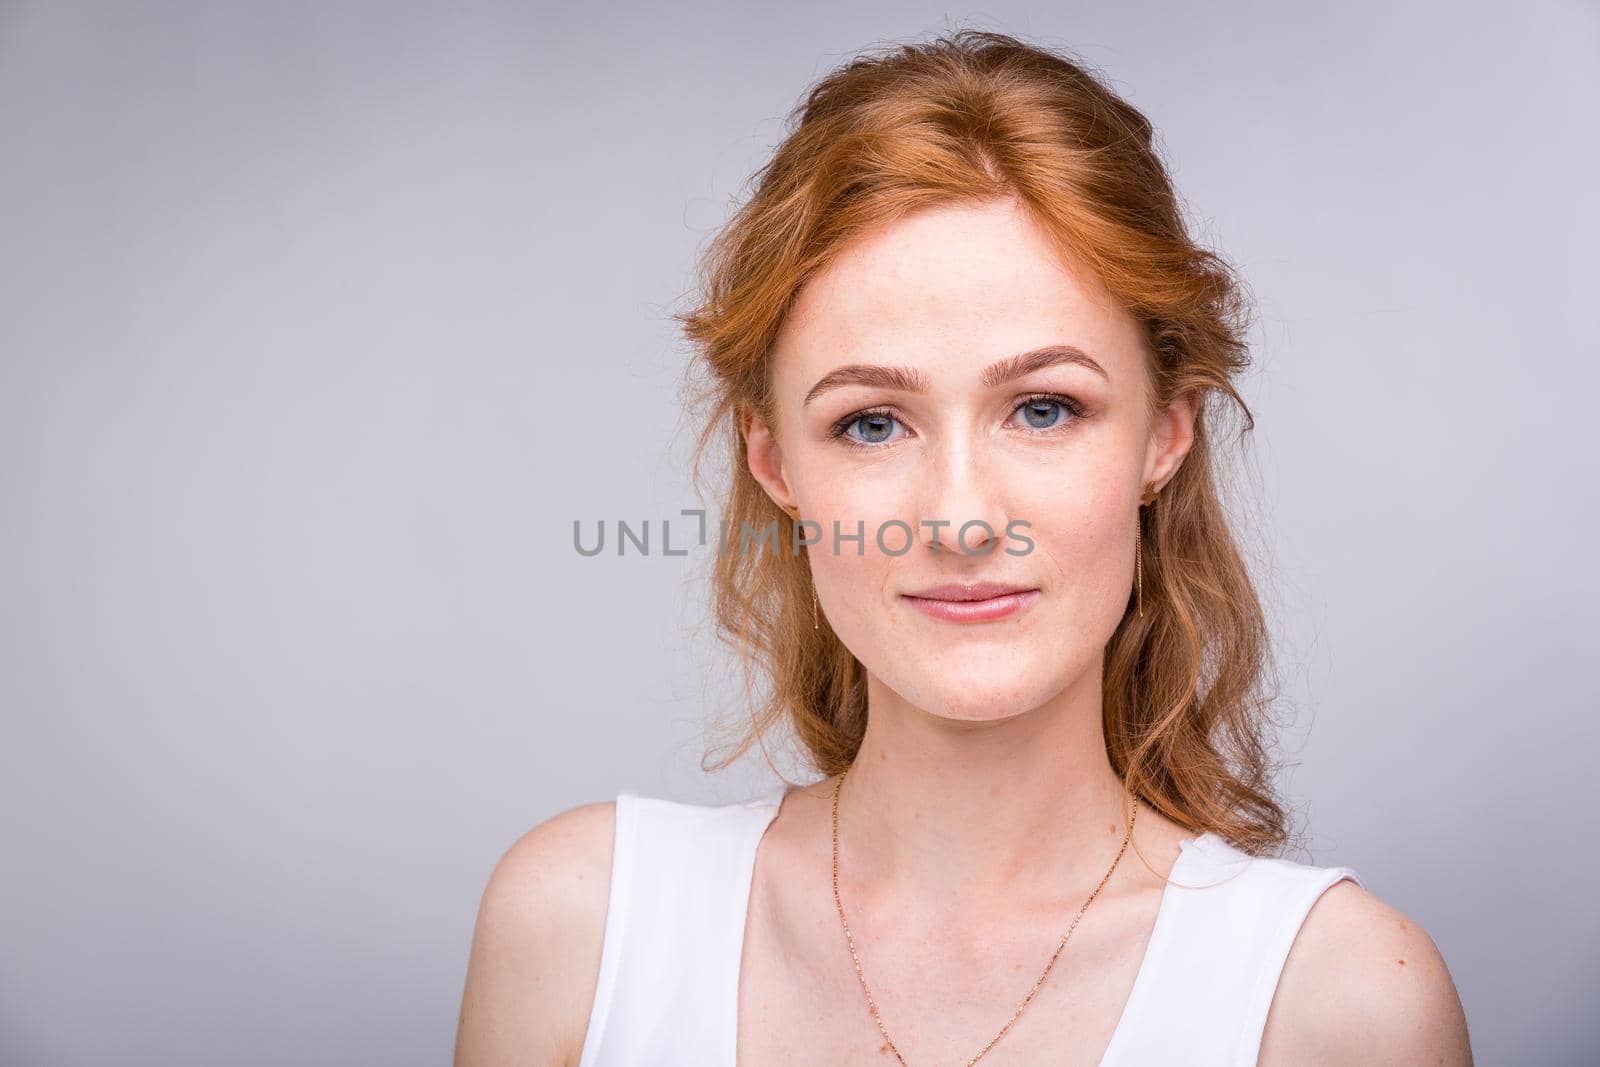 Portrait of a beautiful young woman of European, Caucasian nationality with long red hair and freckles on her face posing on a white background in the studio. Close-up student girl in a white blouse.